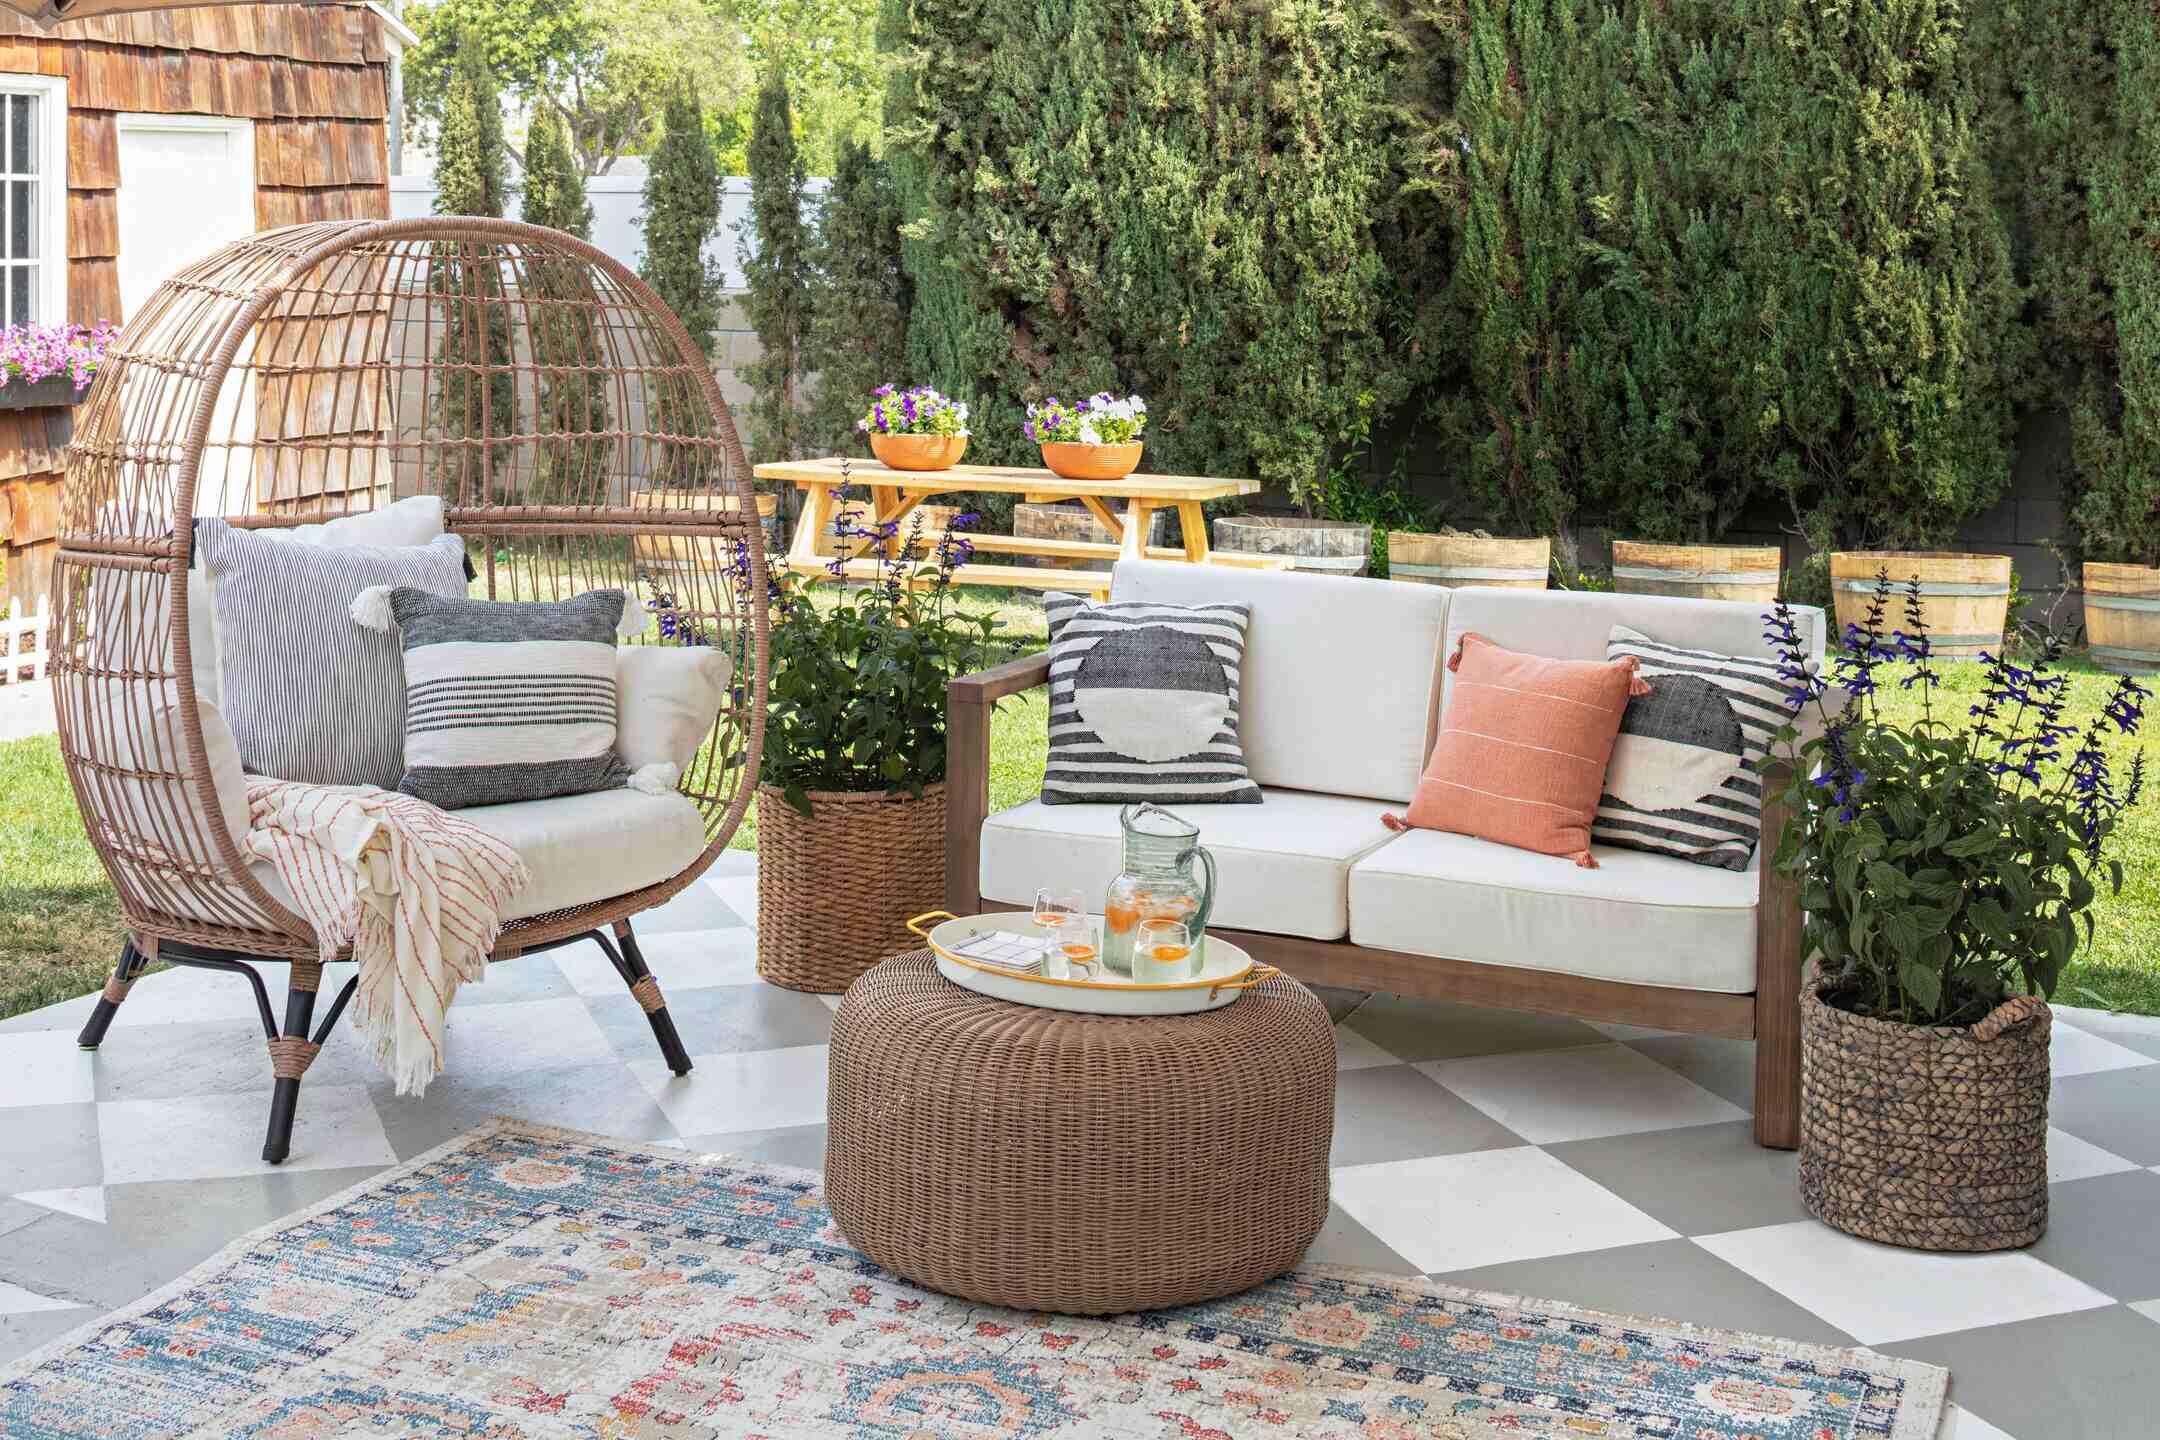 How To Build An Outdoor Living Space